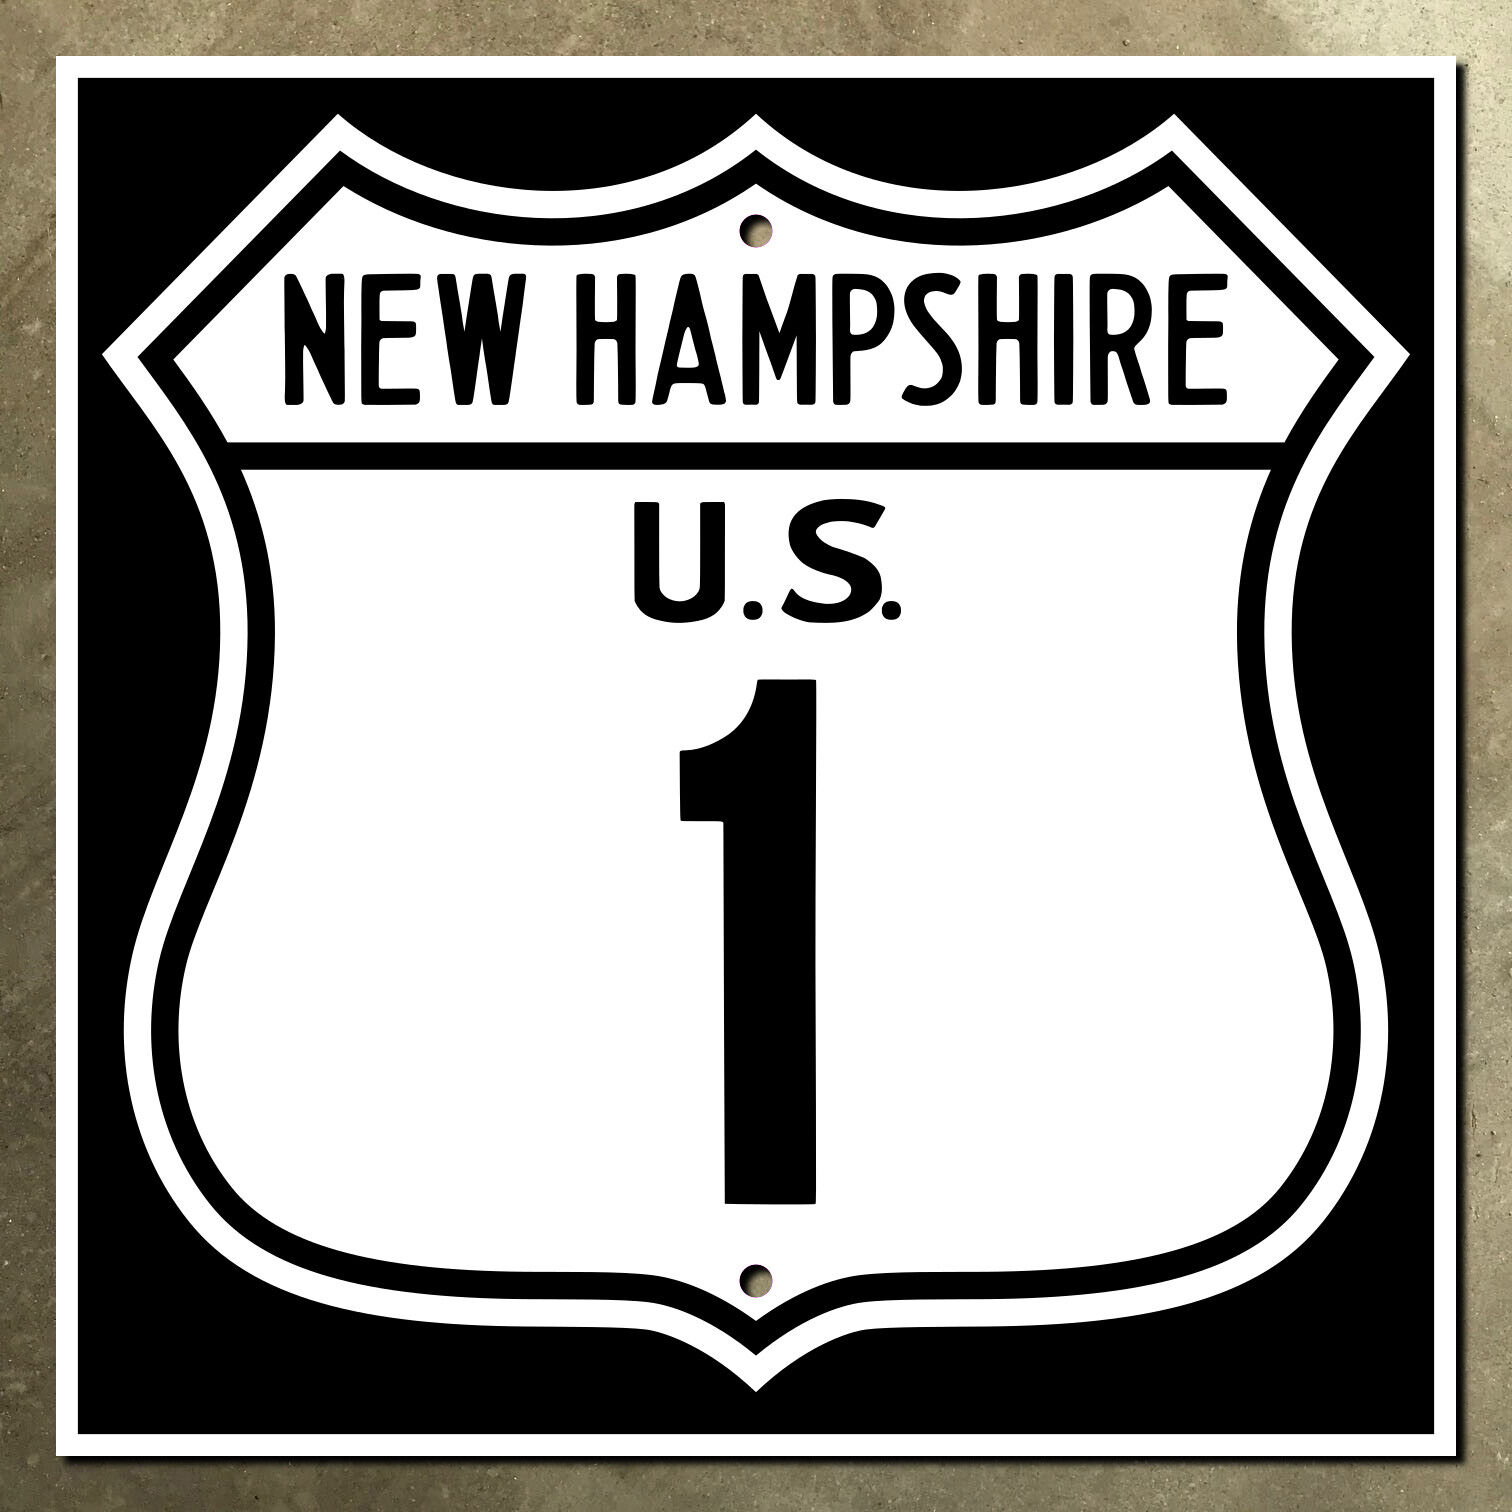 New Hampshire US route 1 highway marker road sign Portsmouth Maine 1961